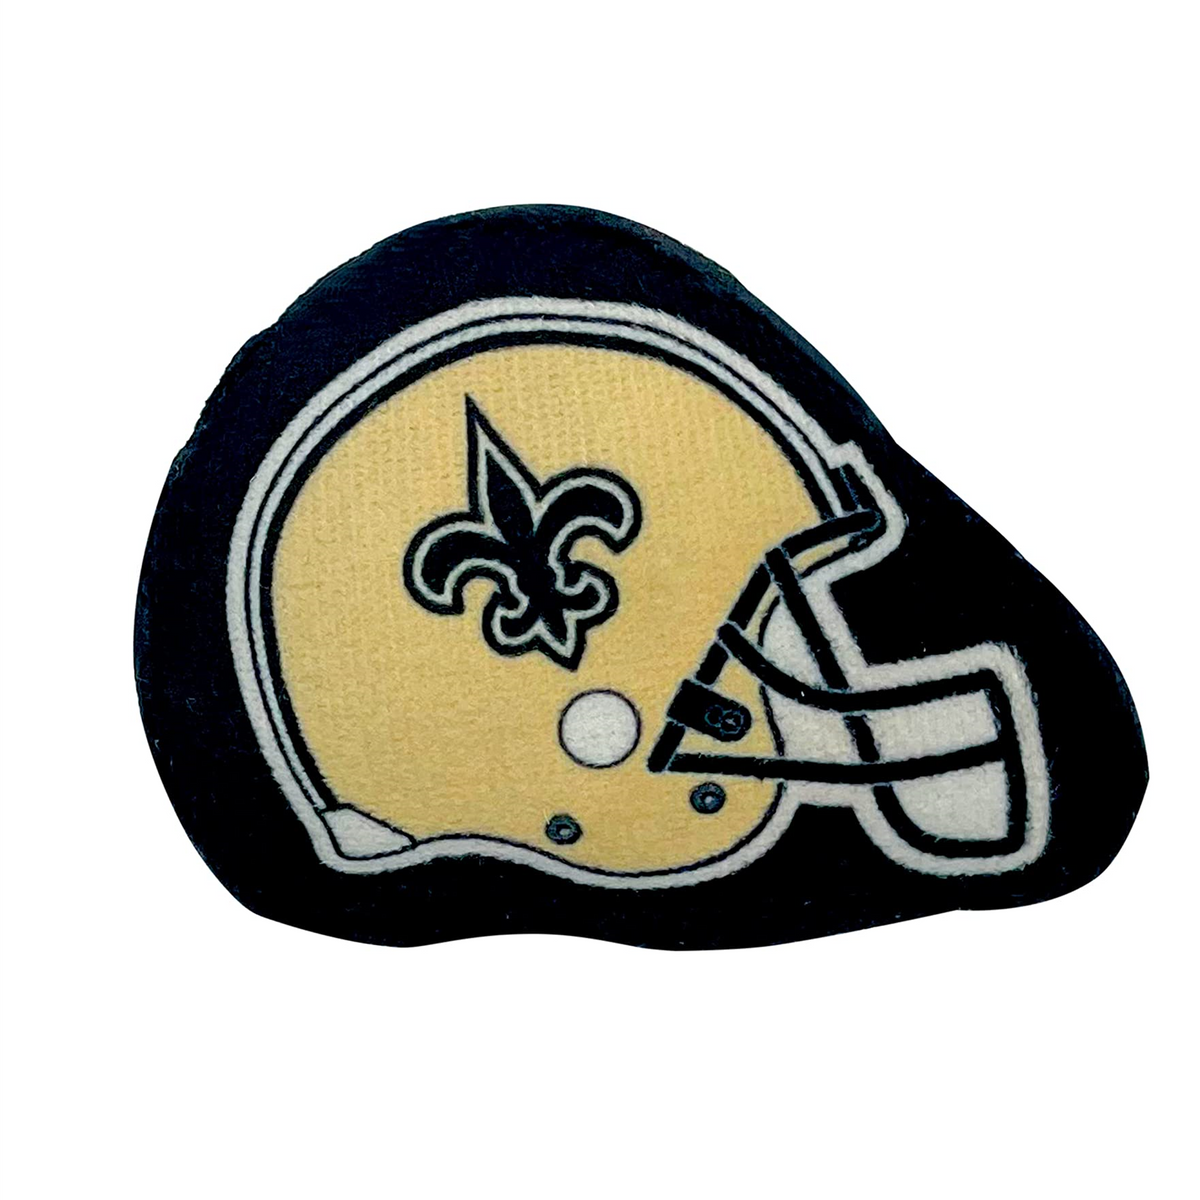 New Orleans Saints 3 piece Catnip Toy Set - 3 Red Rovers